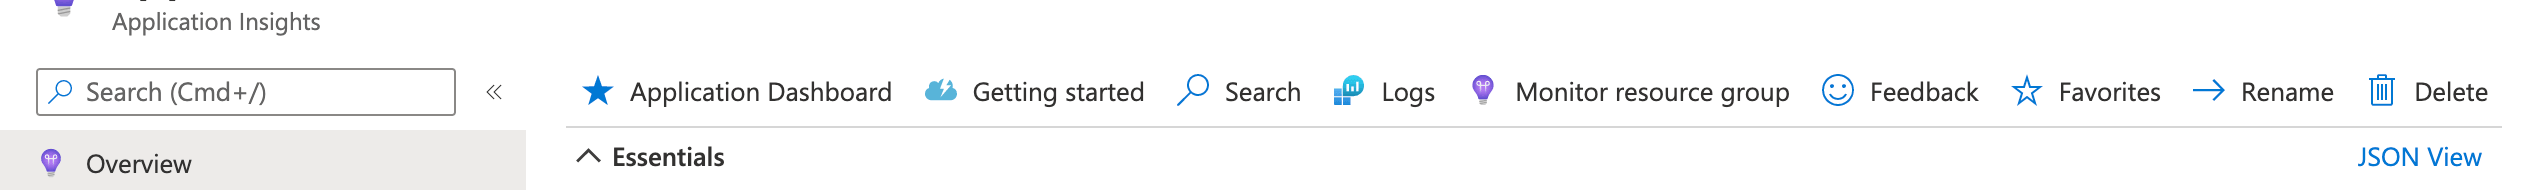 screenshot of the application insights overview screen with a JSON View icon on the right